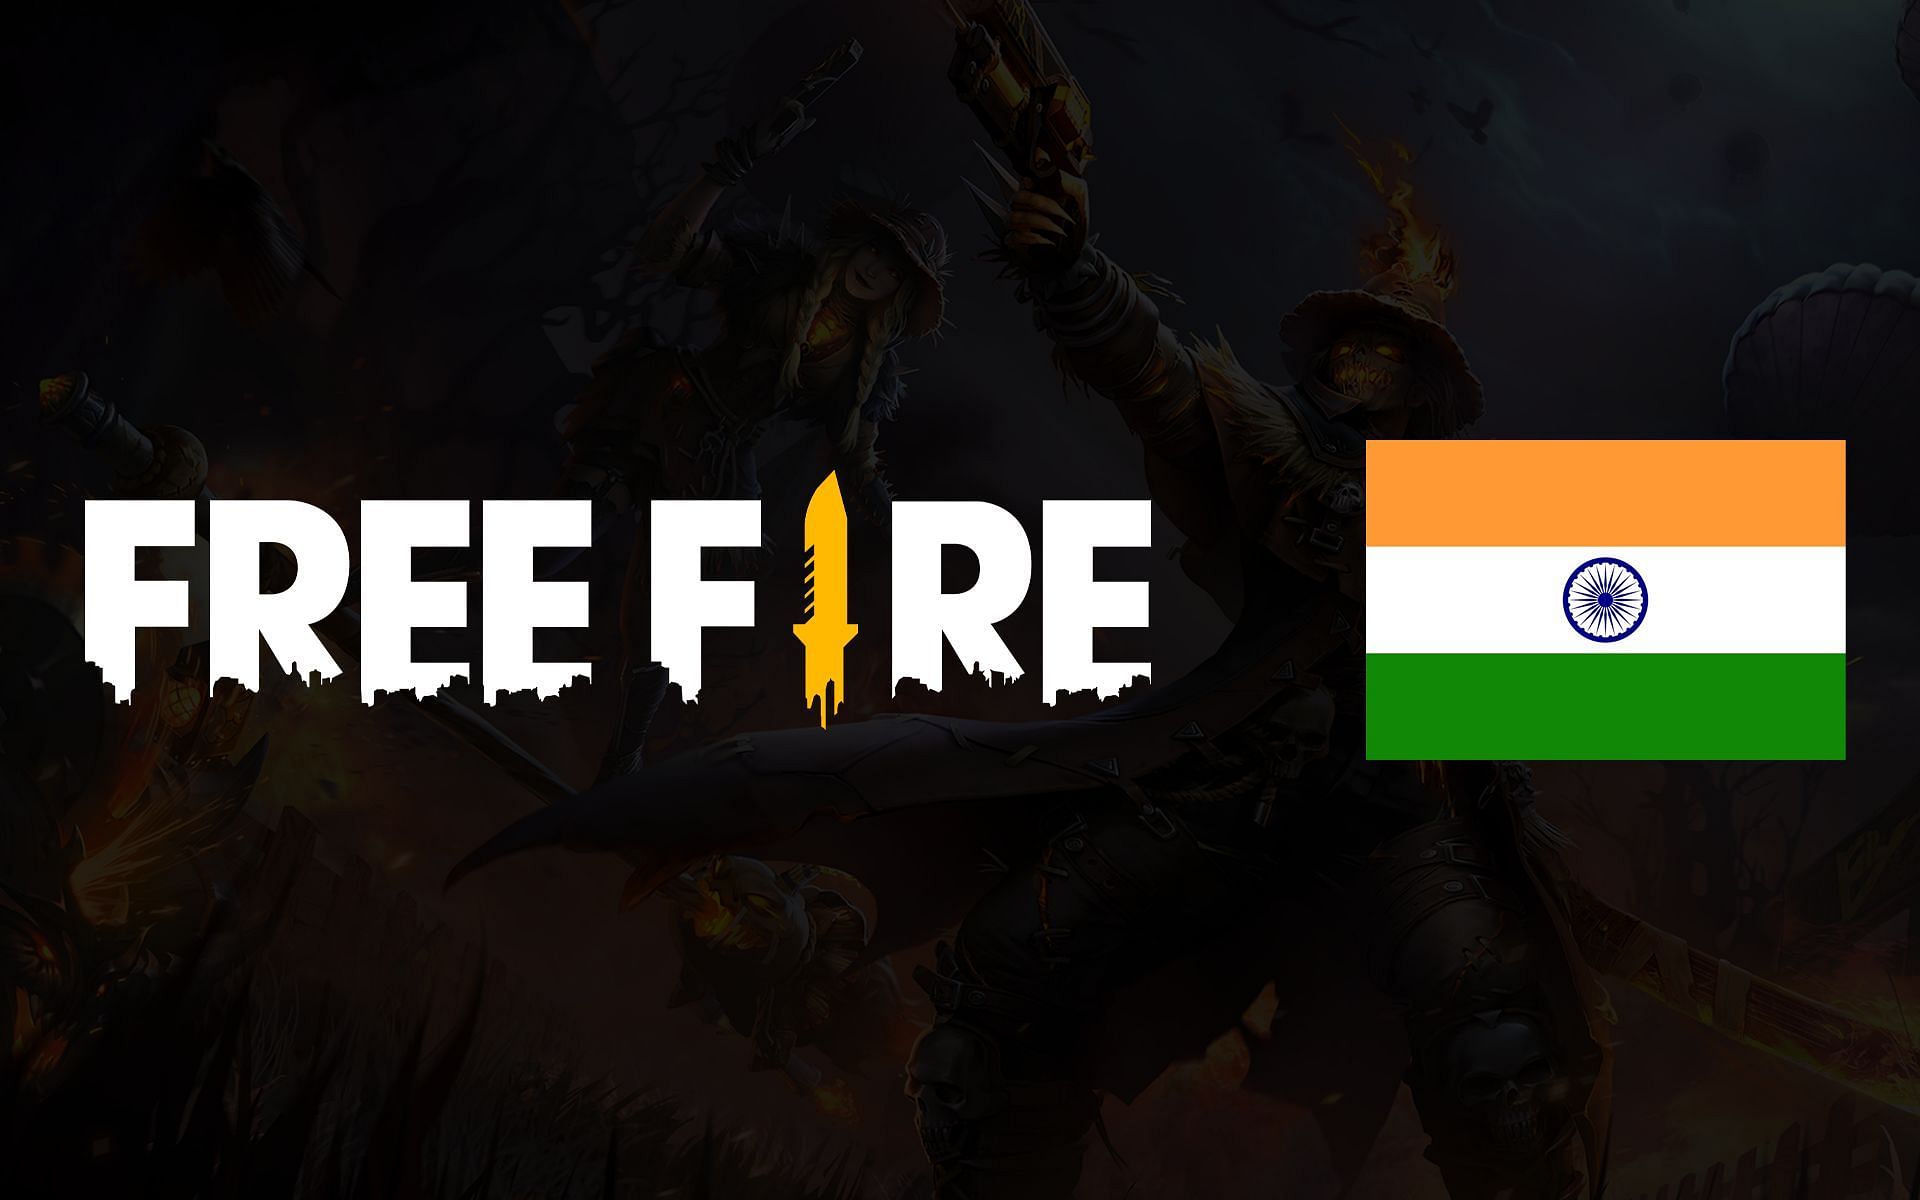 How to Play Free Fire after Ban in India